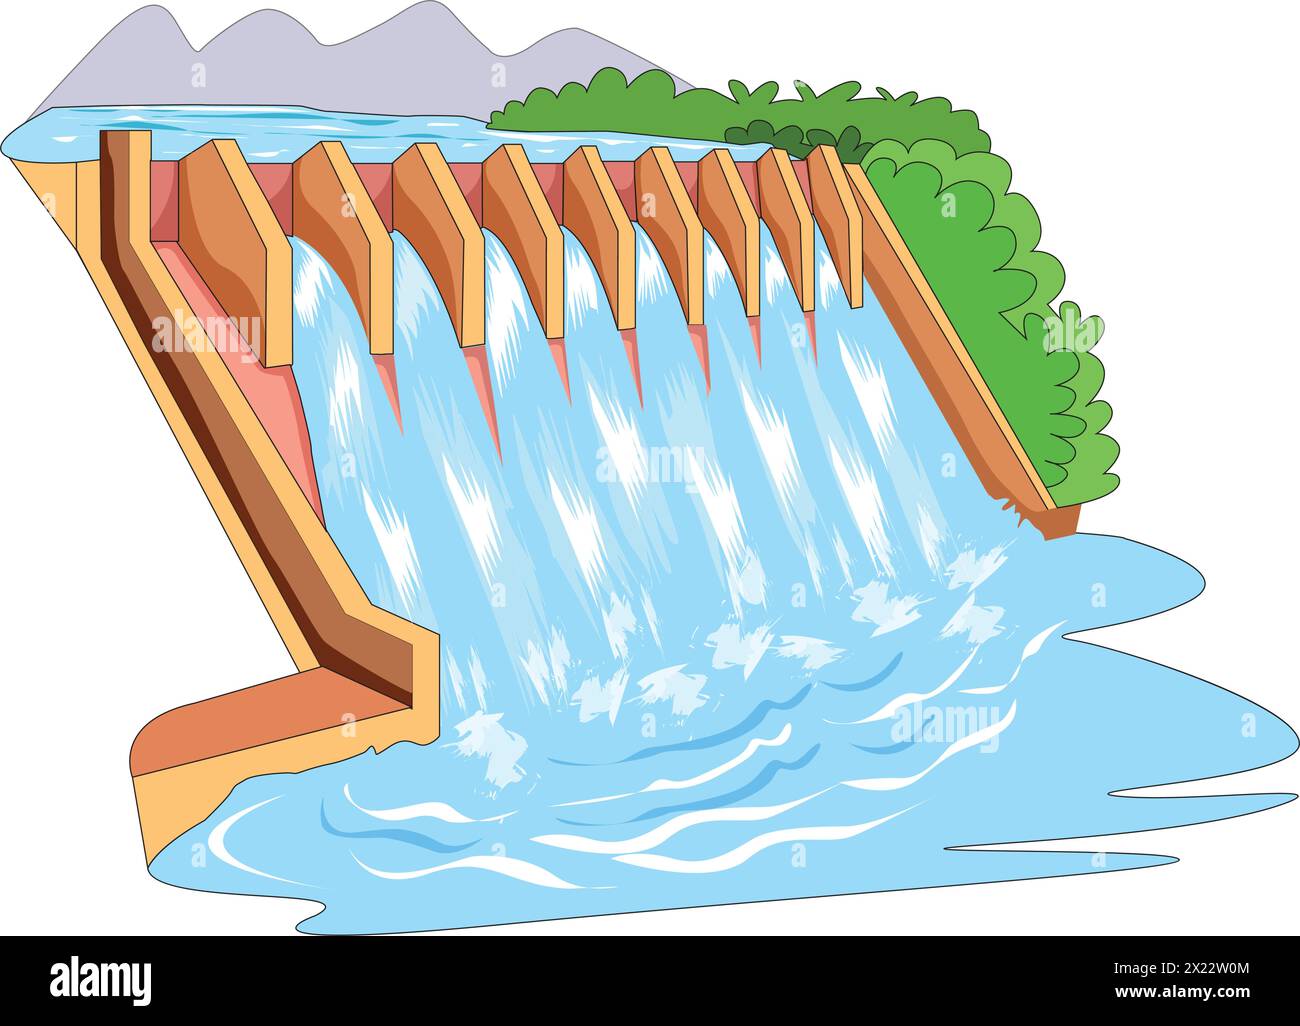 Dam vector illustration in an isolate background Stock Vector